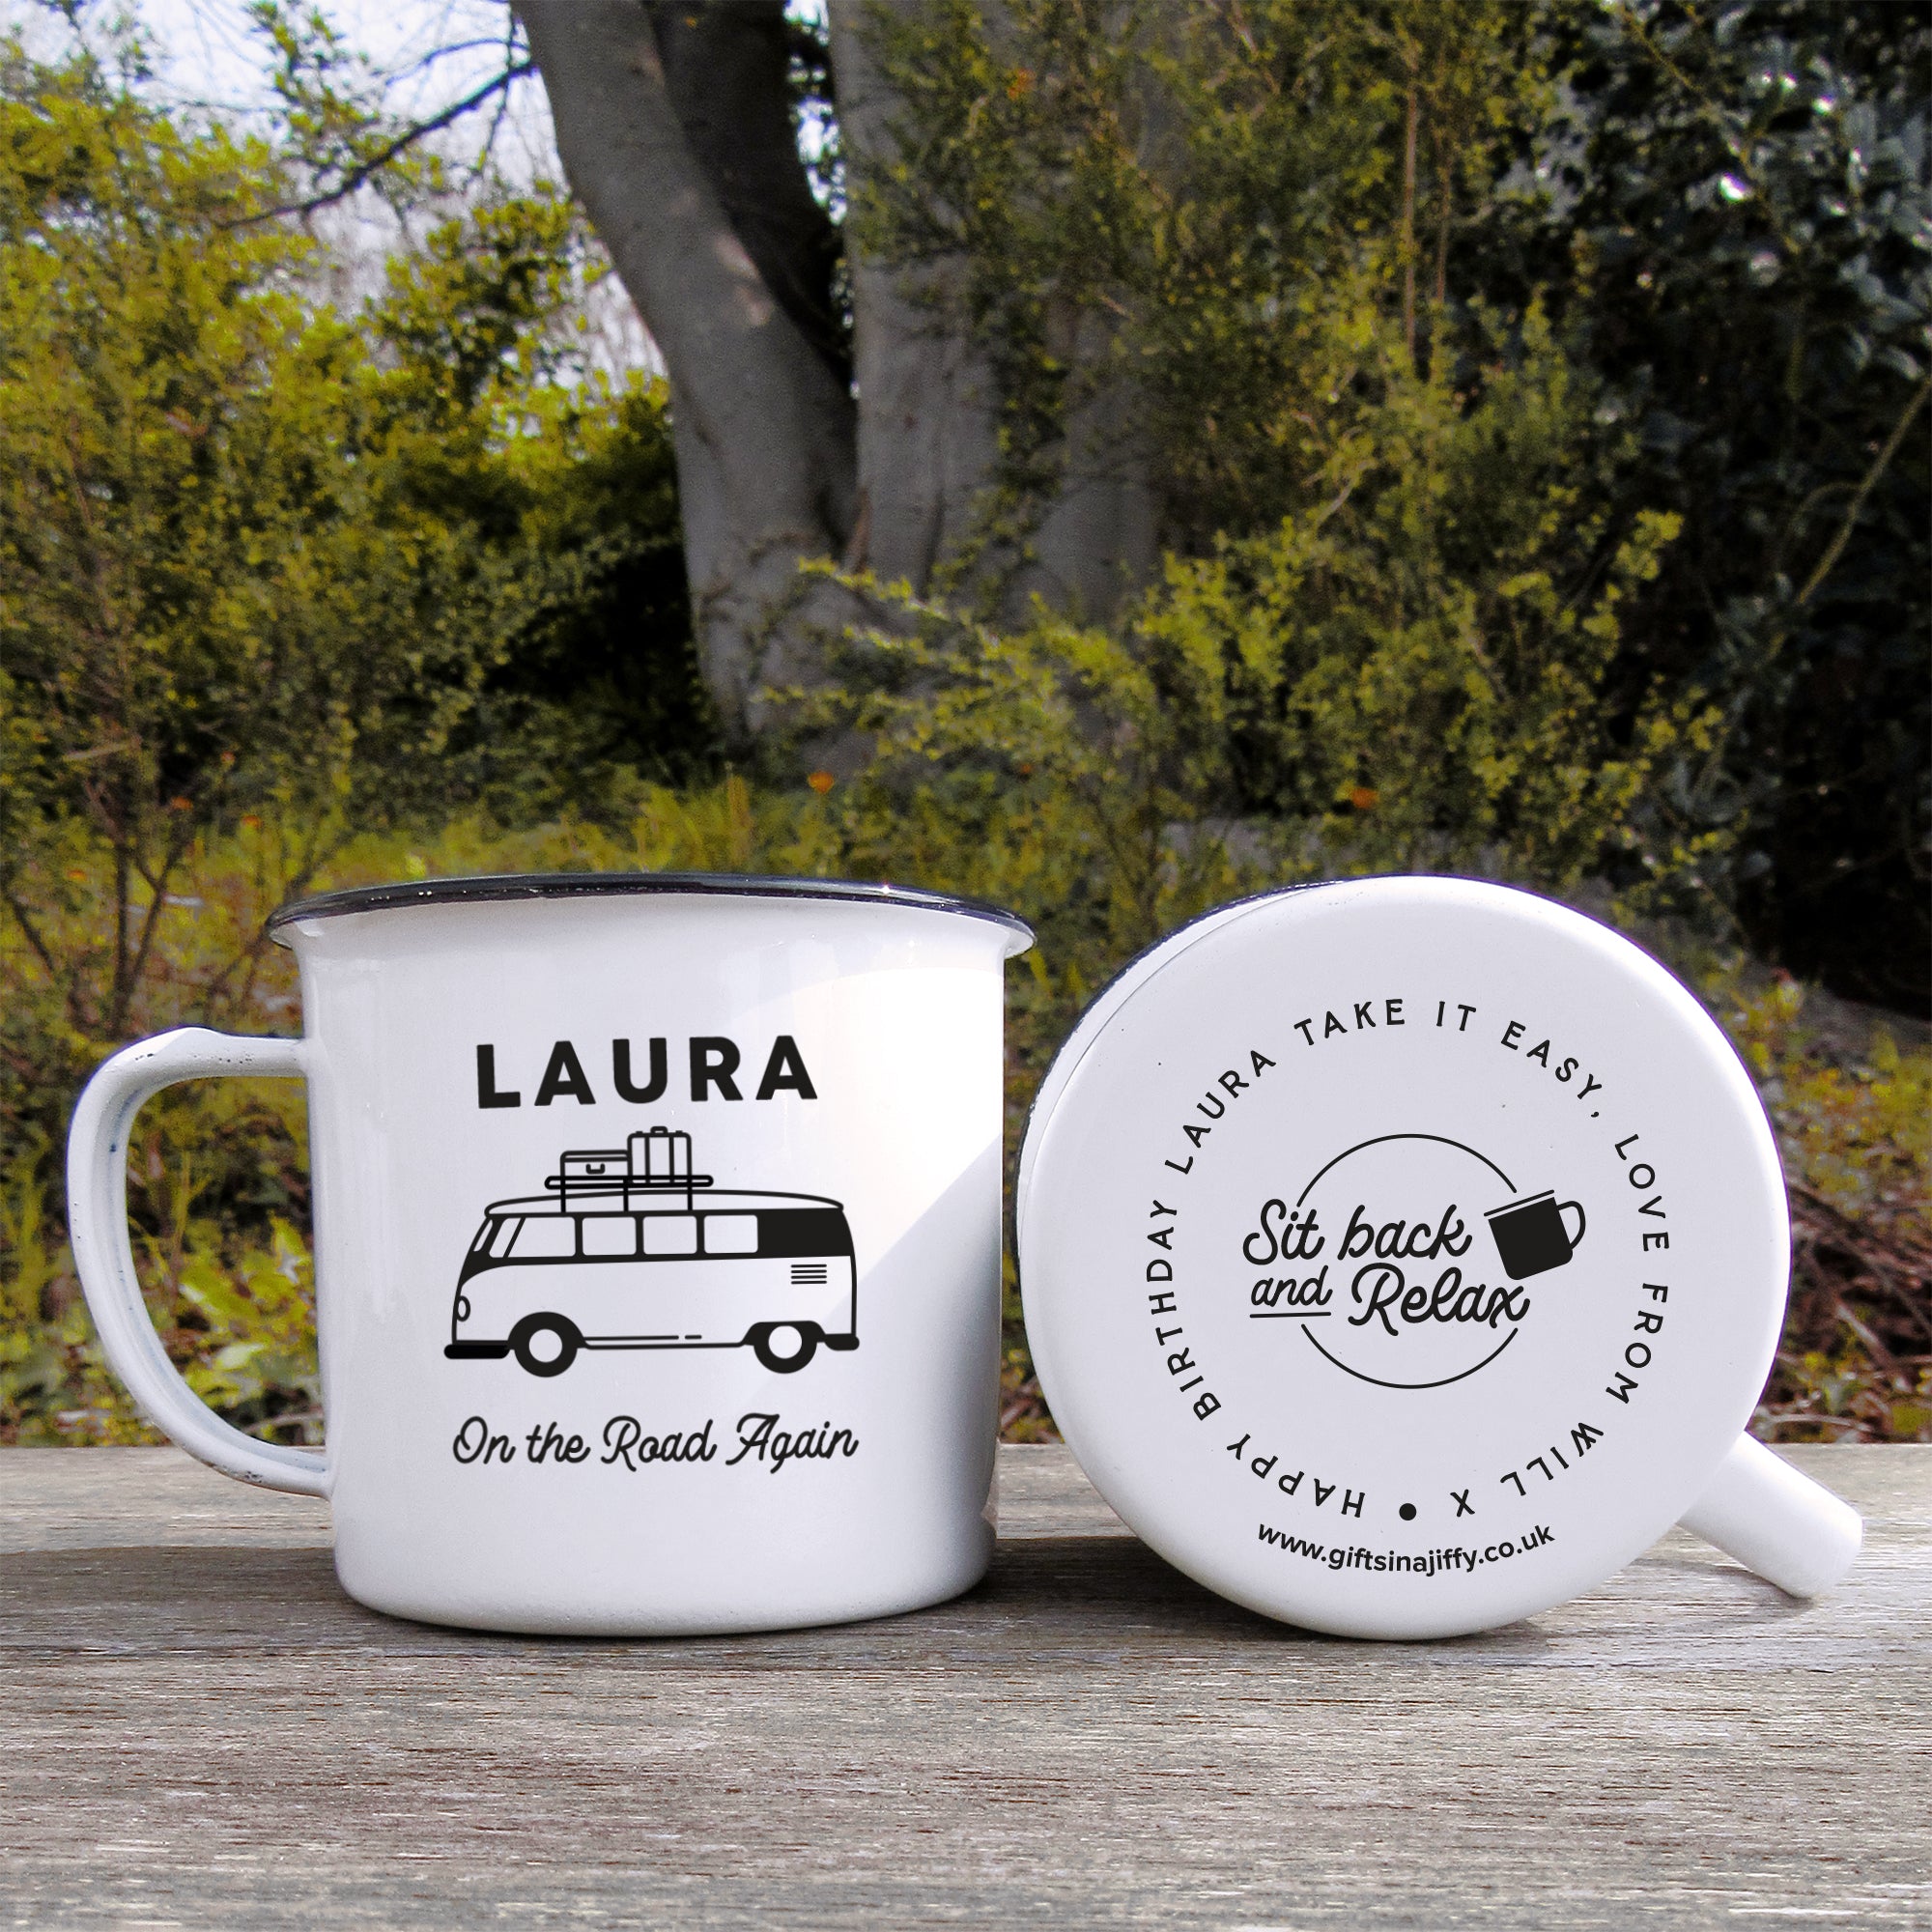 Enamel Mug Mug With Name, as a Gift, Cup for Engagement, Girlfriend, Van, VW  Bus, Love, Colleague, Work Colleague, -  Ireland